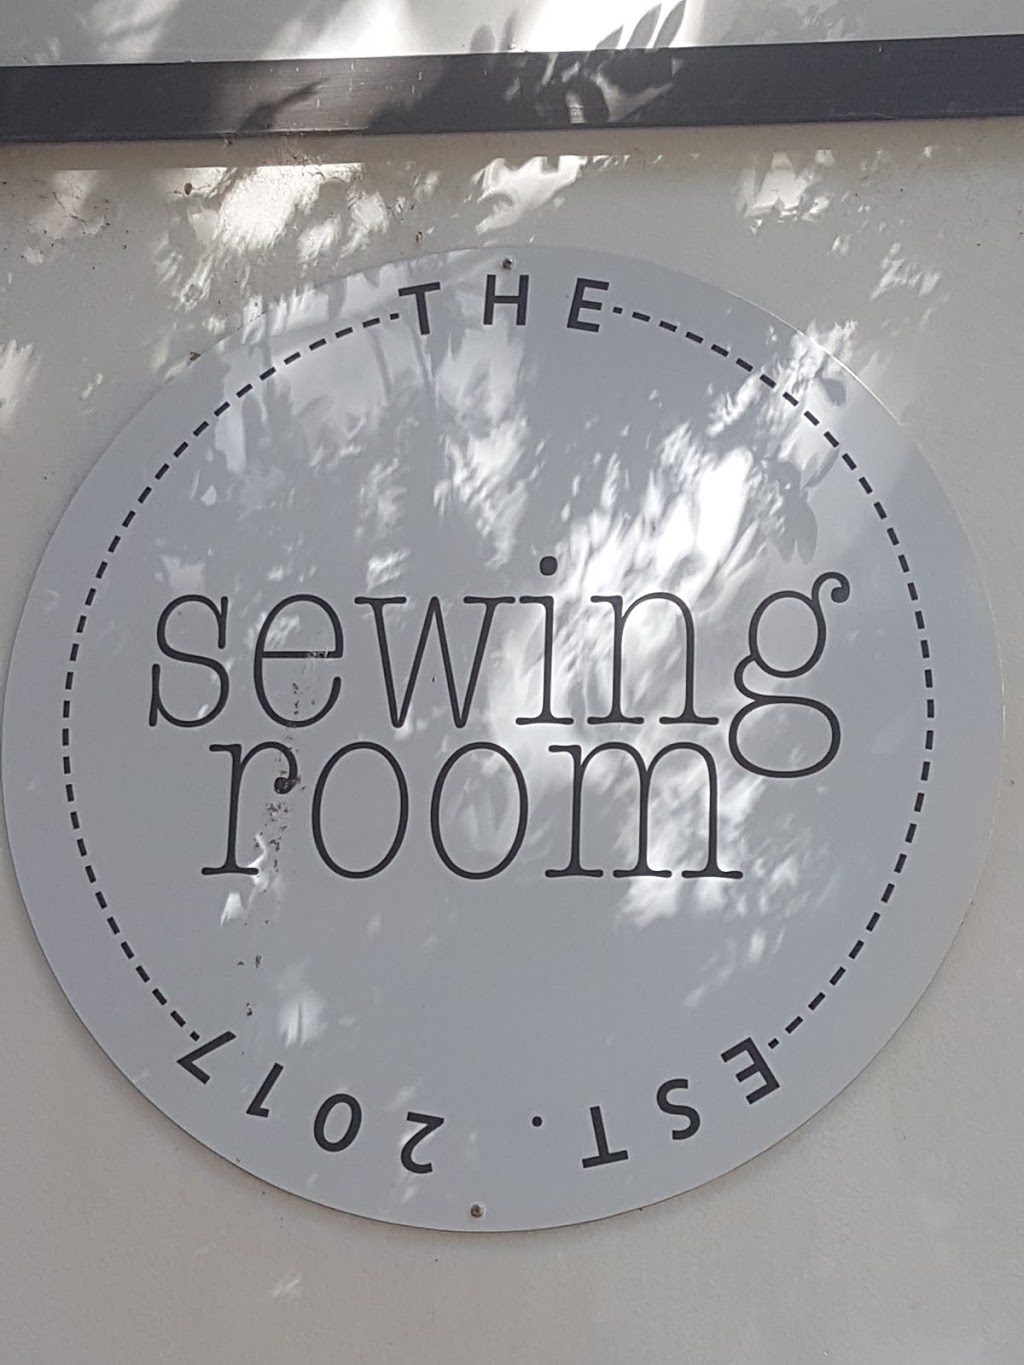 The Sewing Room | store | 32-46 Gwydir Hwy, Inverell NSW 2360, Australia | 0413711327 OR +61 413 711 327